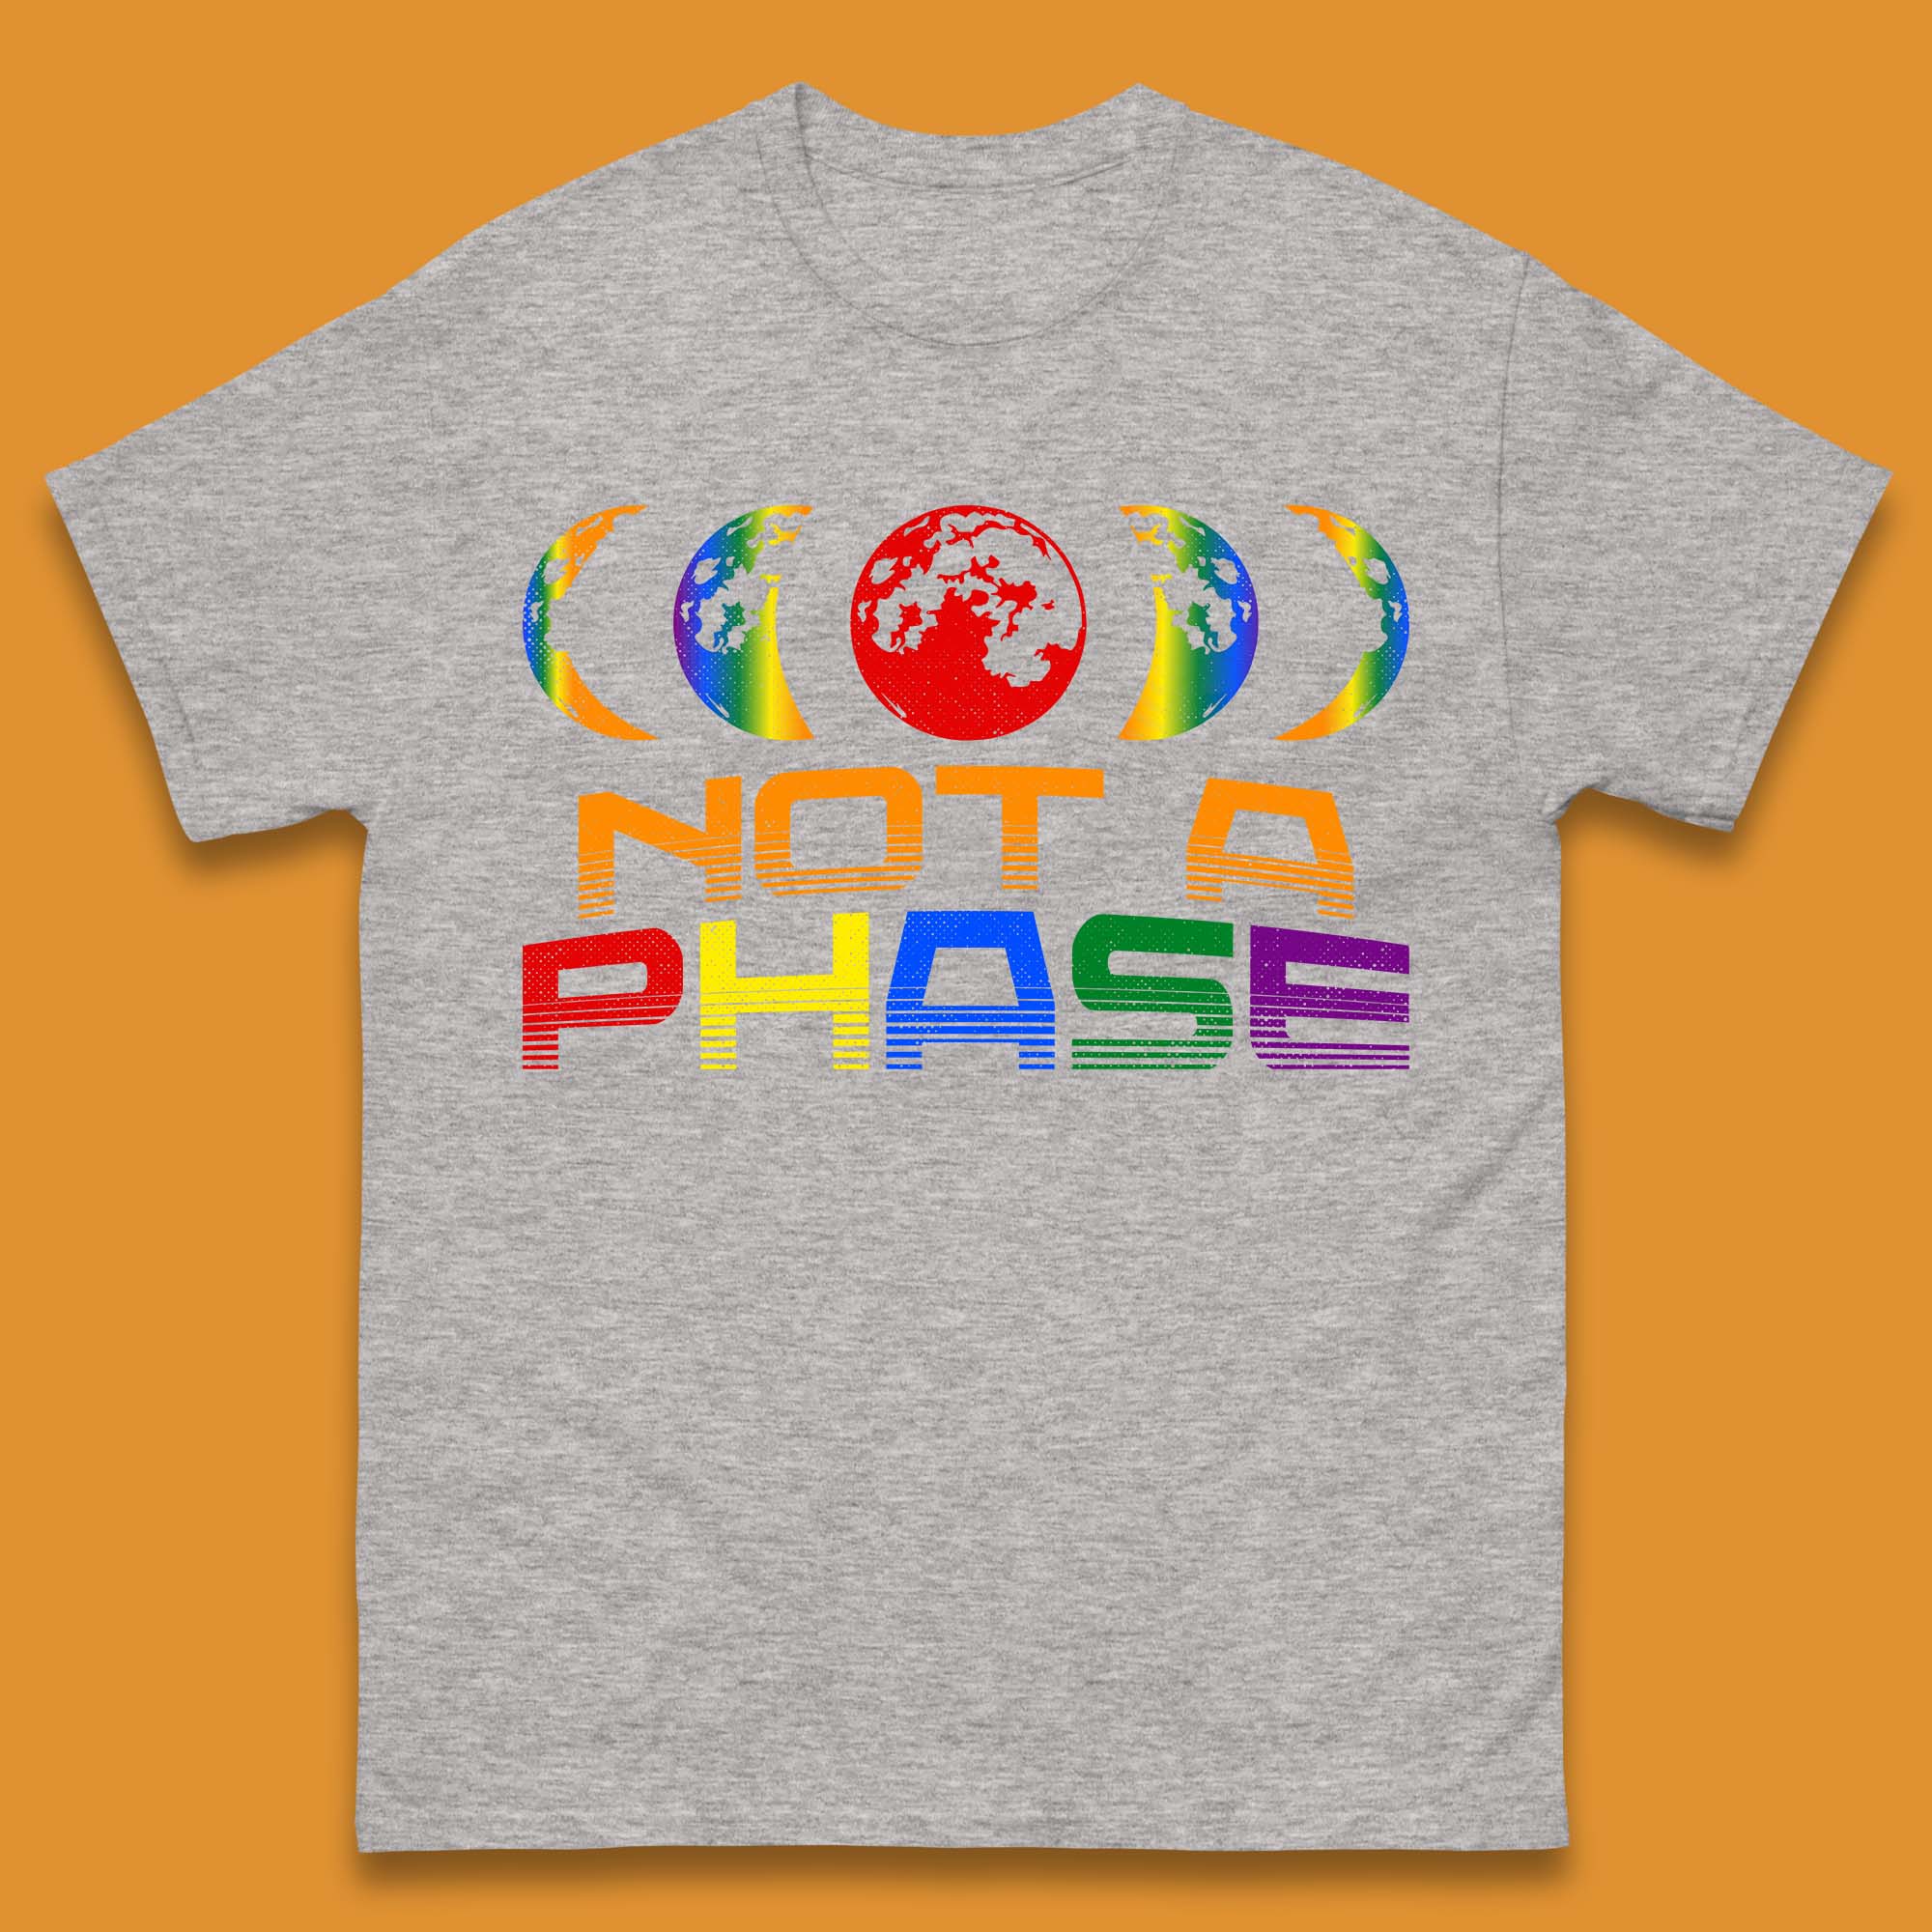 Not A Phase Mens T-Shirt